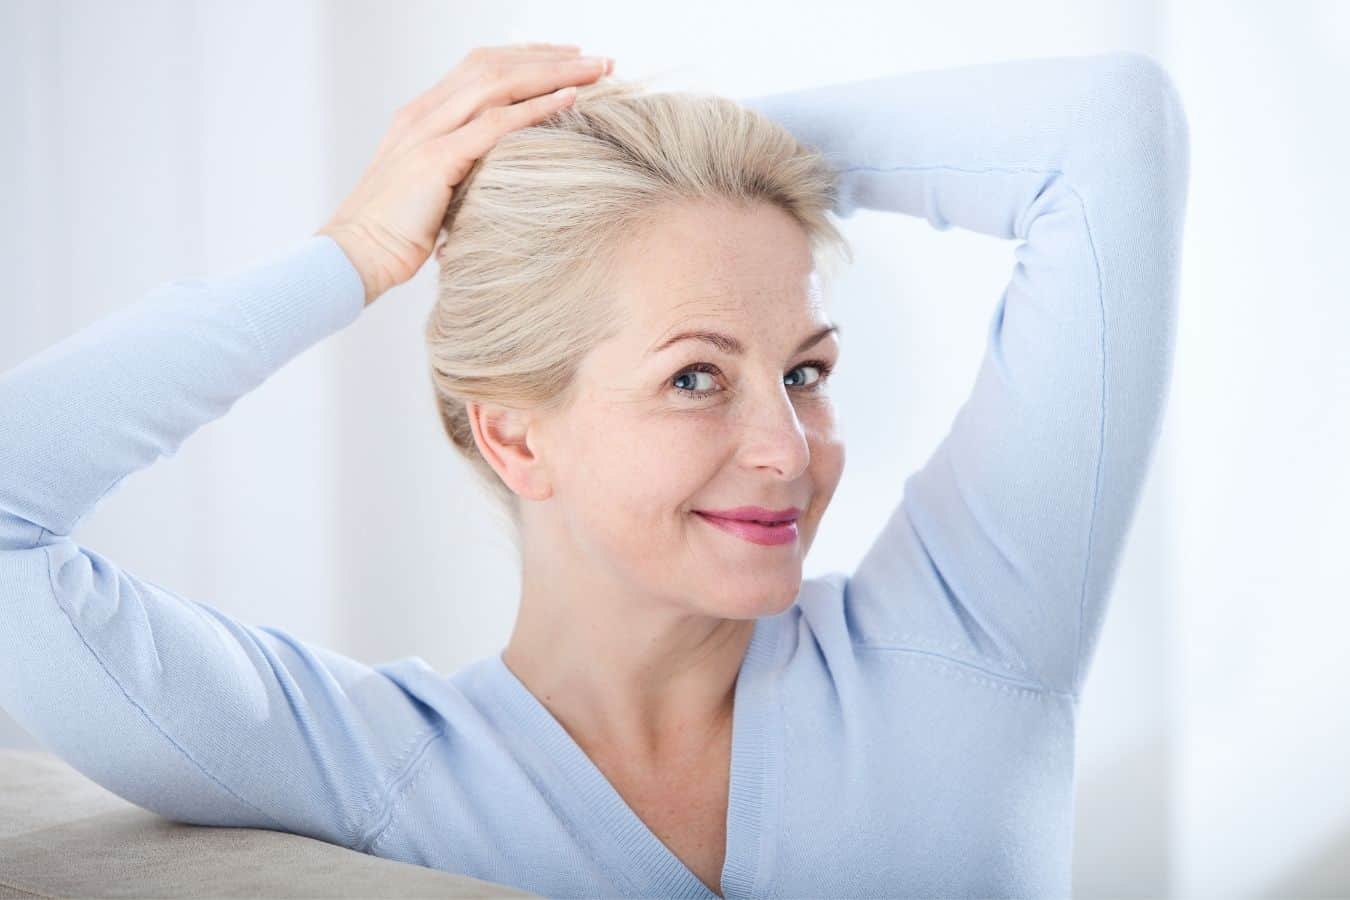 Shampoo And Conditioner For Menopausal Hair